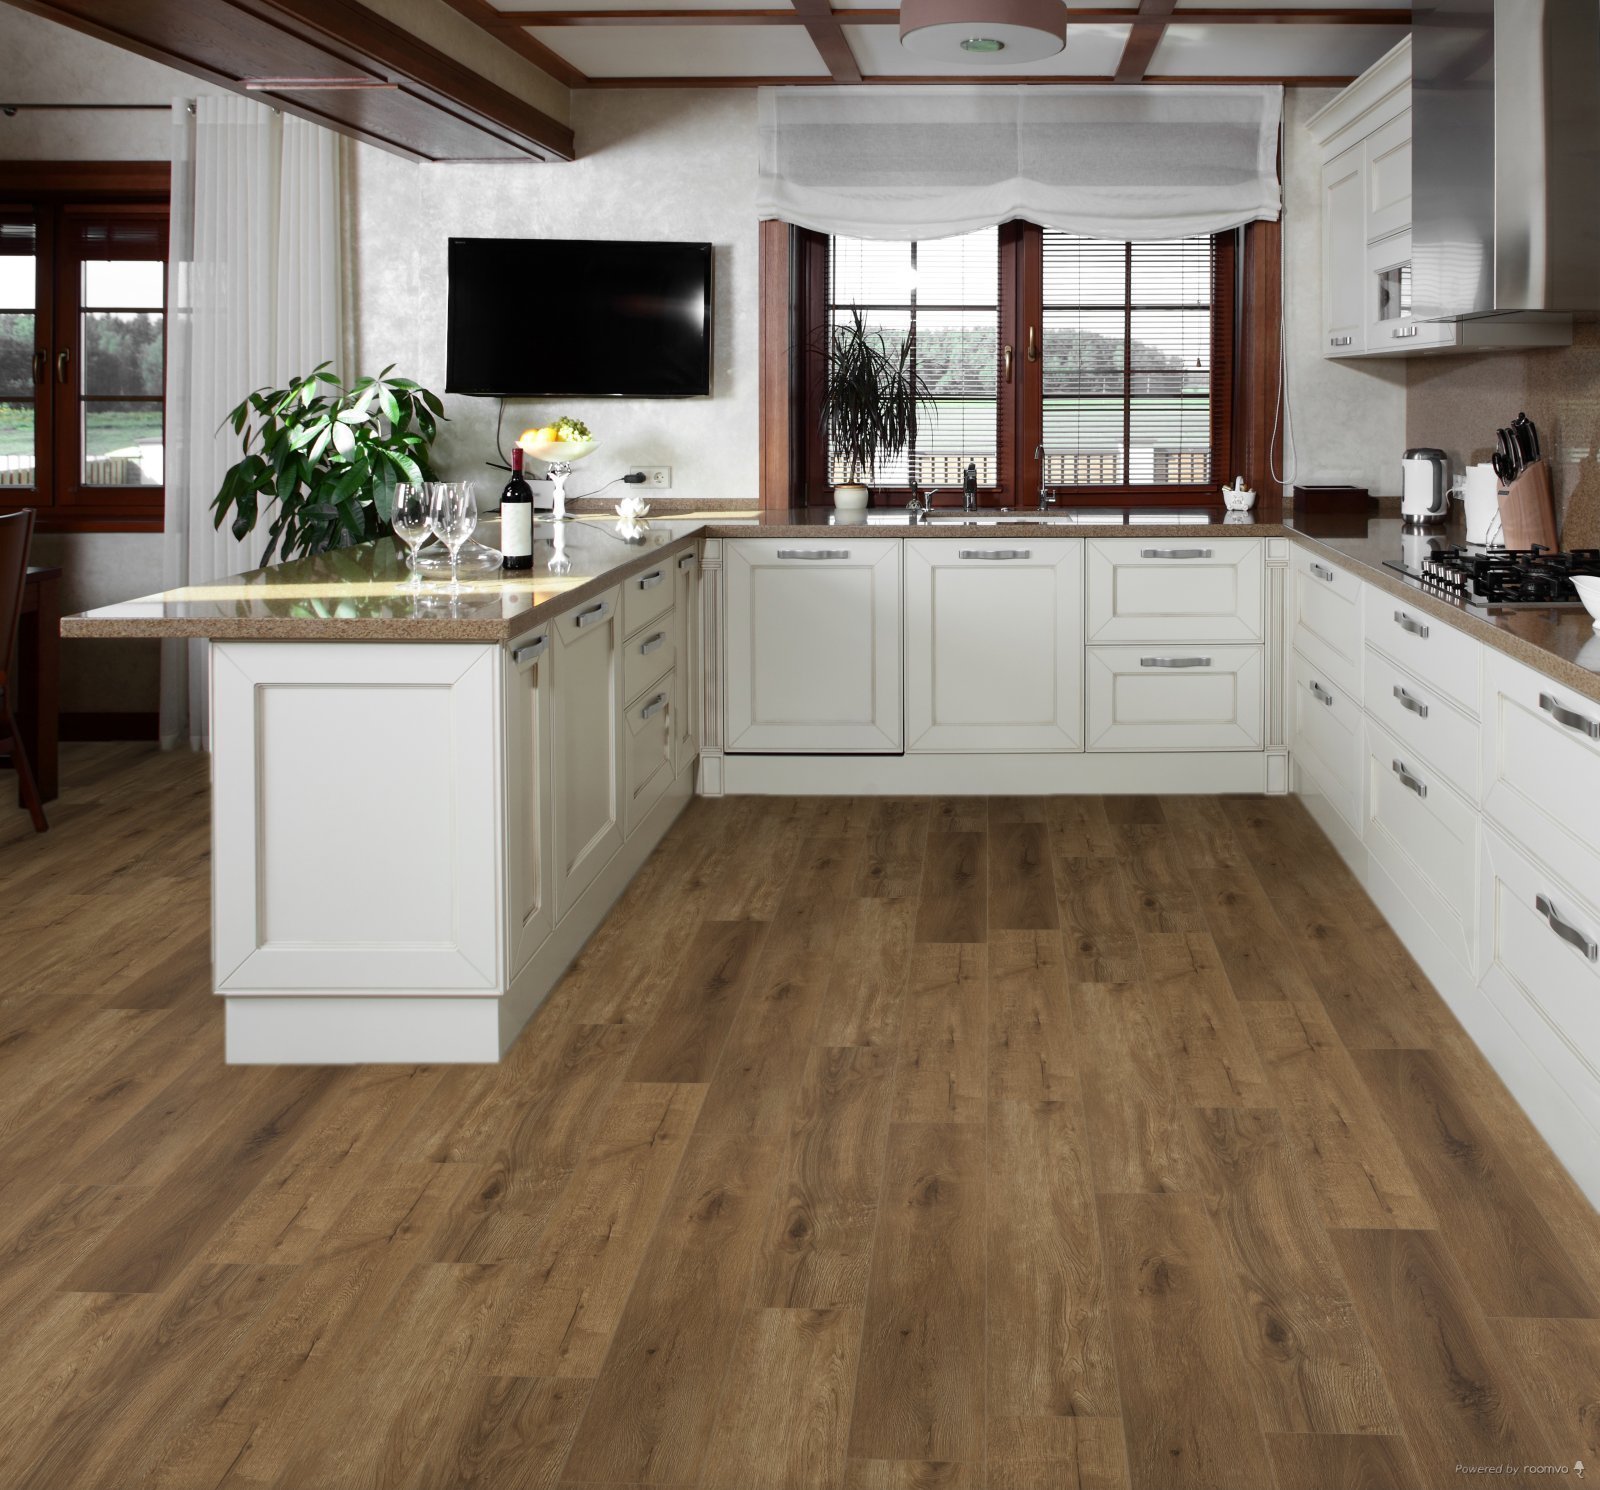 Horizen Flooring presents to you a picture of a quality wide plank Waycross luxury vinyl plank. NovoCore Premium EIR collection features a wide range of colors & designs that will compliment any interior. Natural wood grain synchronized surface allow for an authentic hardwood look & feel. This collection features a 0.25″ / 6.5 mm overall thickness and a durable 22 mil / 0.55 mm wear layer for residential and commercial applications.